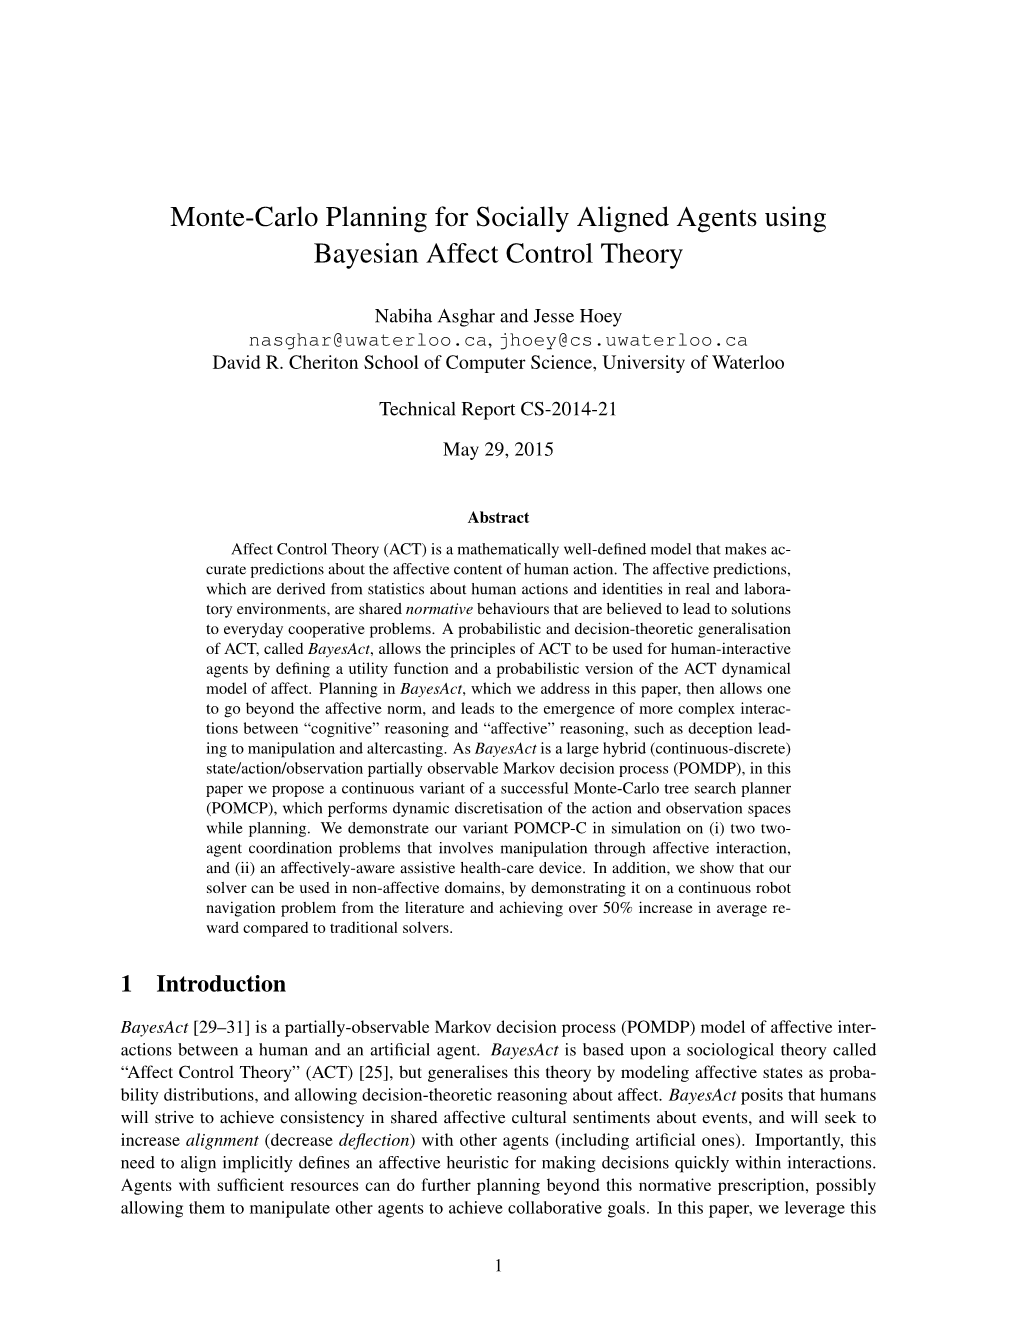 Monte-Carlo Planning for Socially Aligned Agents Using Bayesian Affect Control Theory